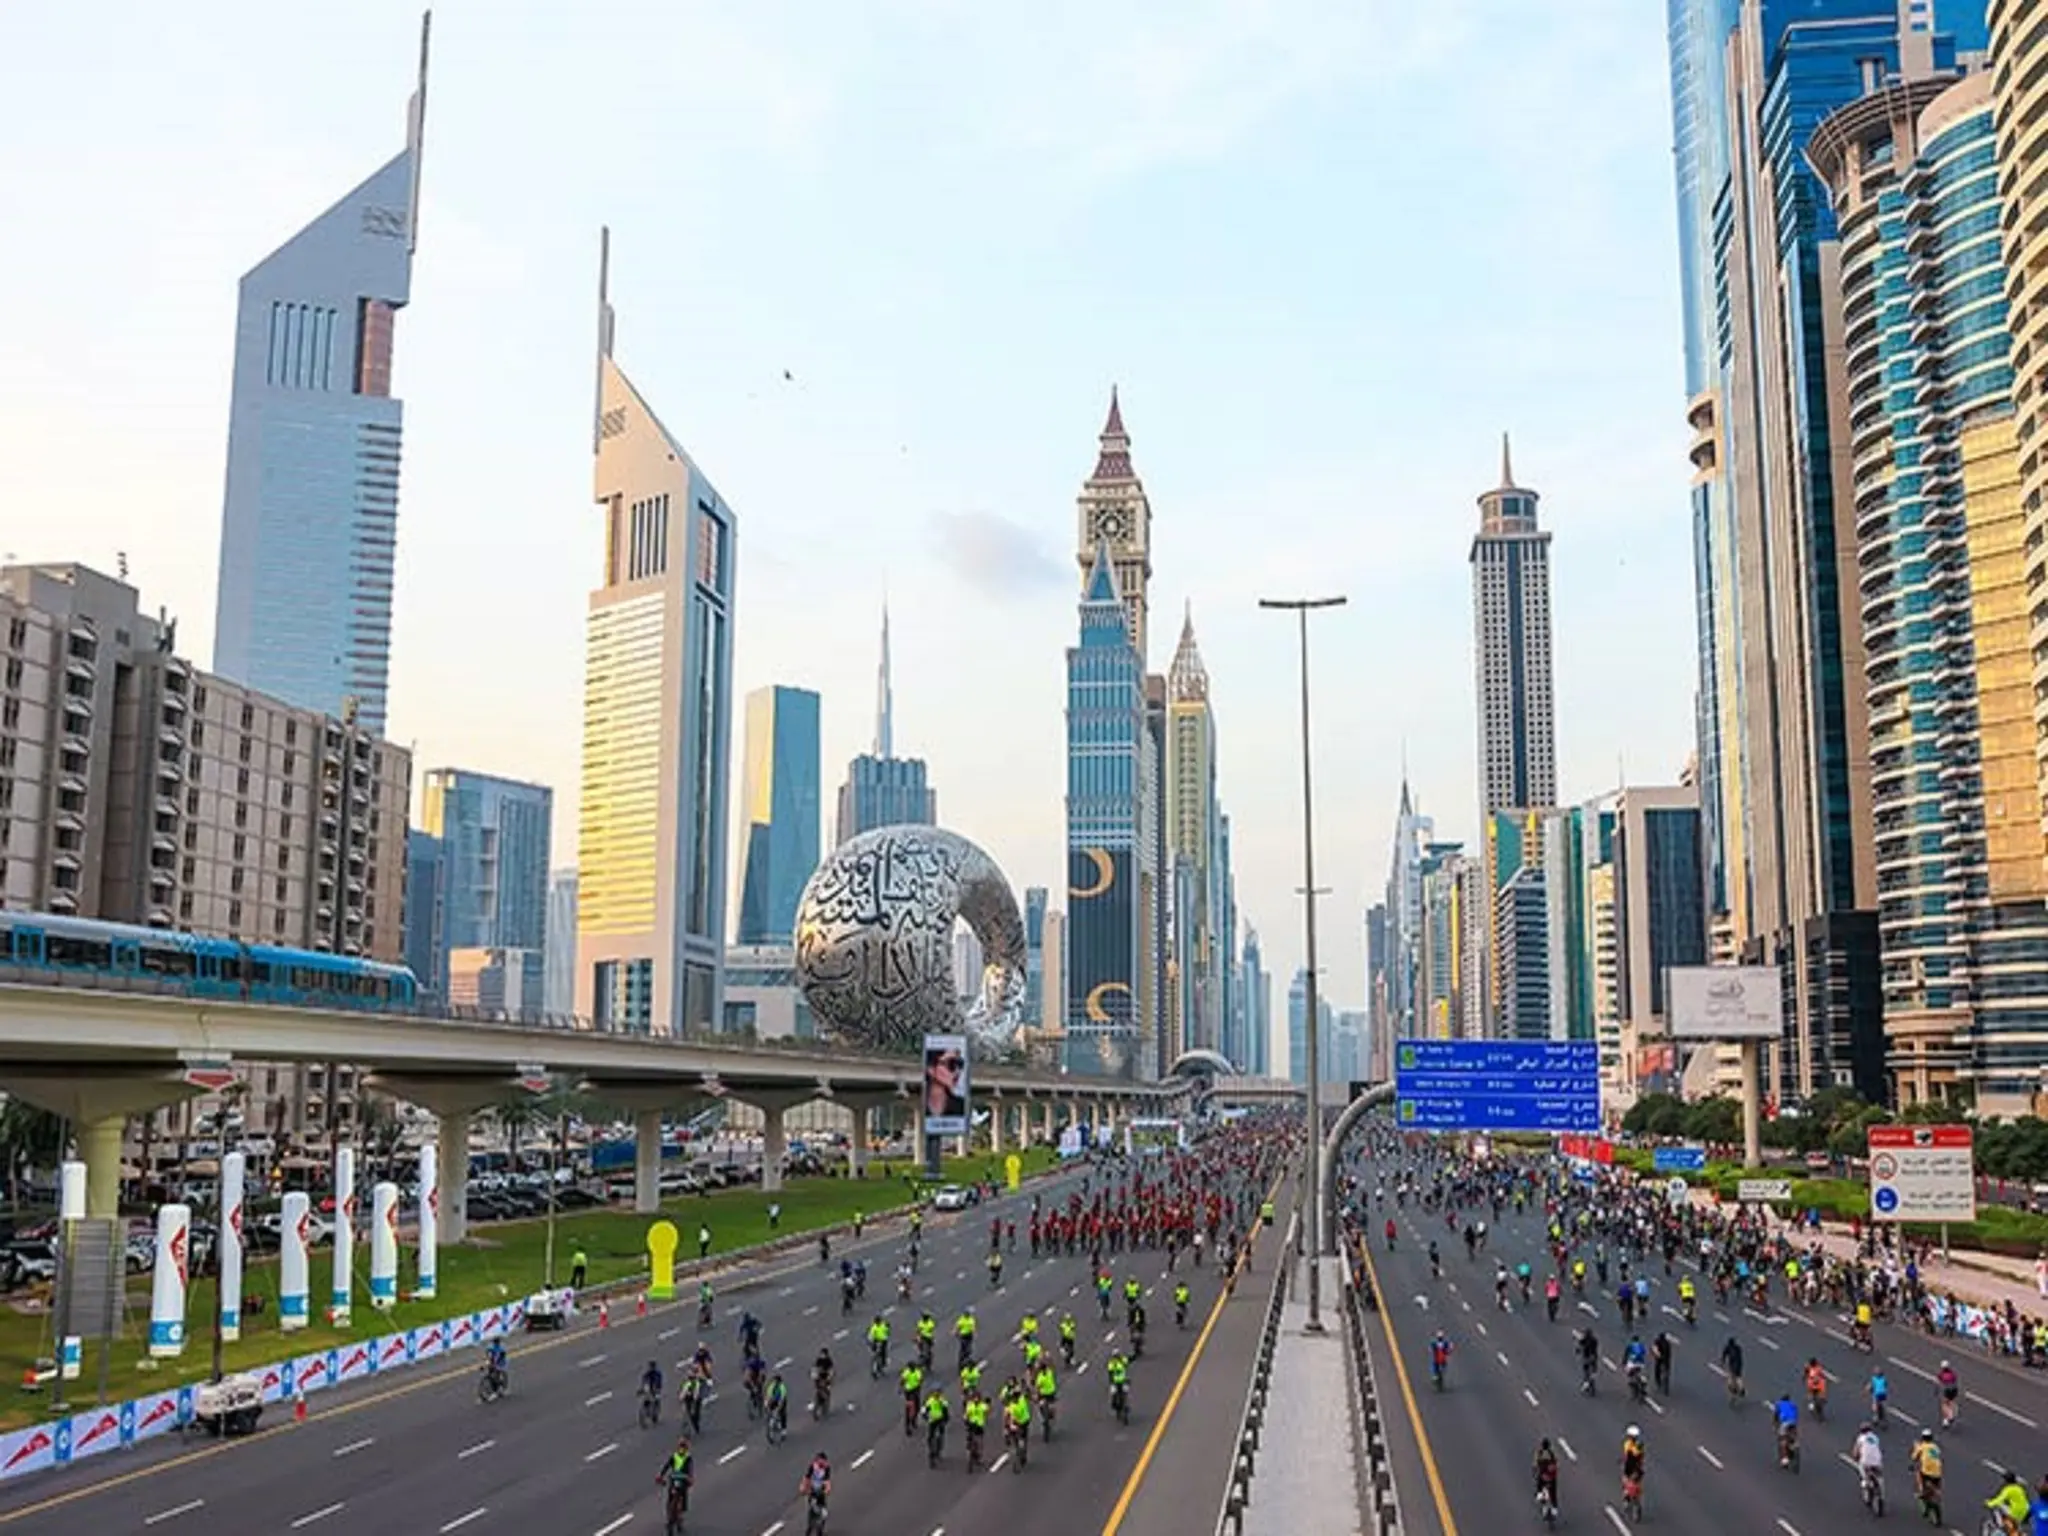 Drivers in Dubai, take note: tomorrow is Sheikh Zayed Road closure day due to a bicycle event